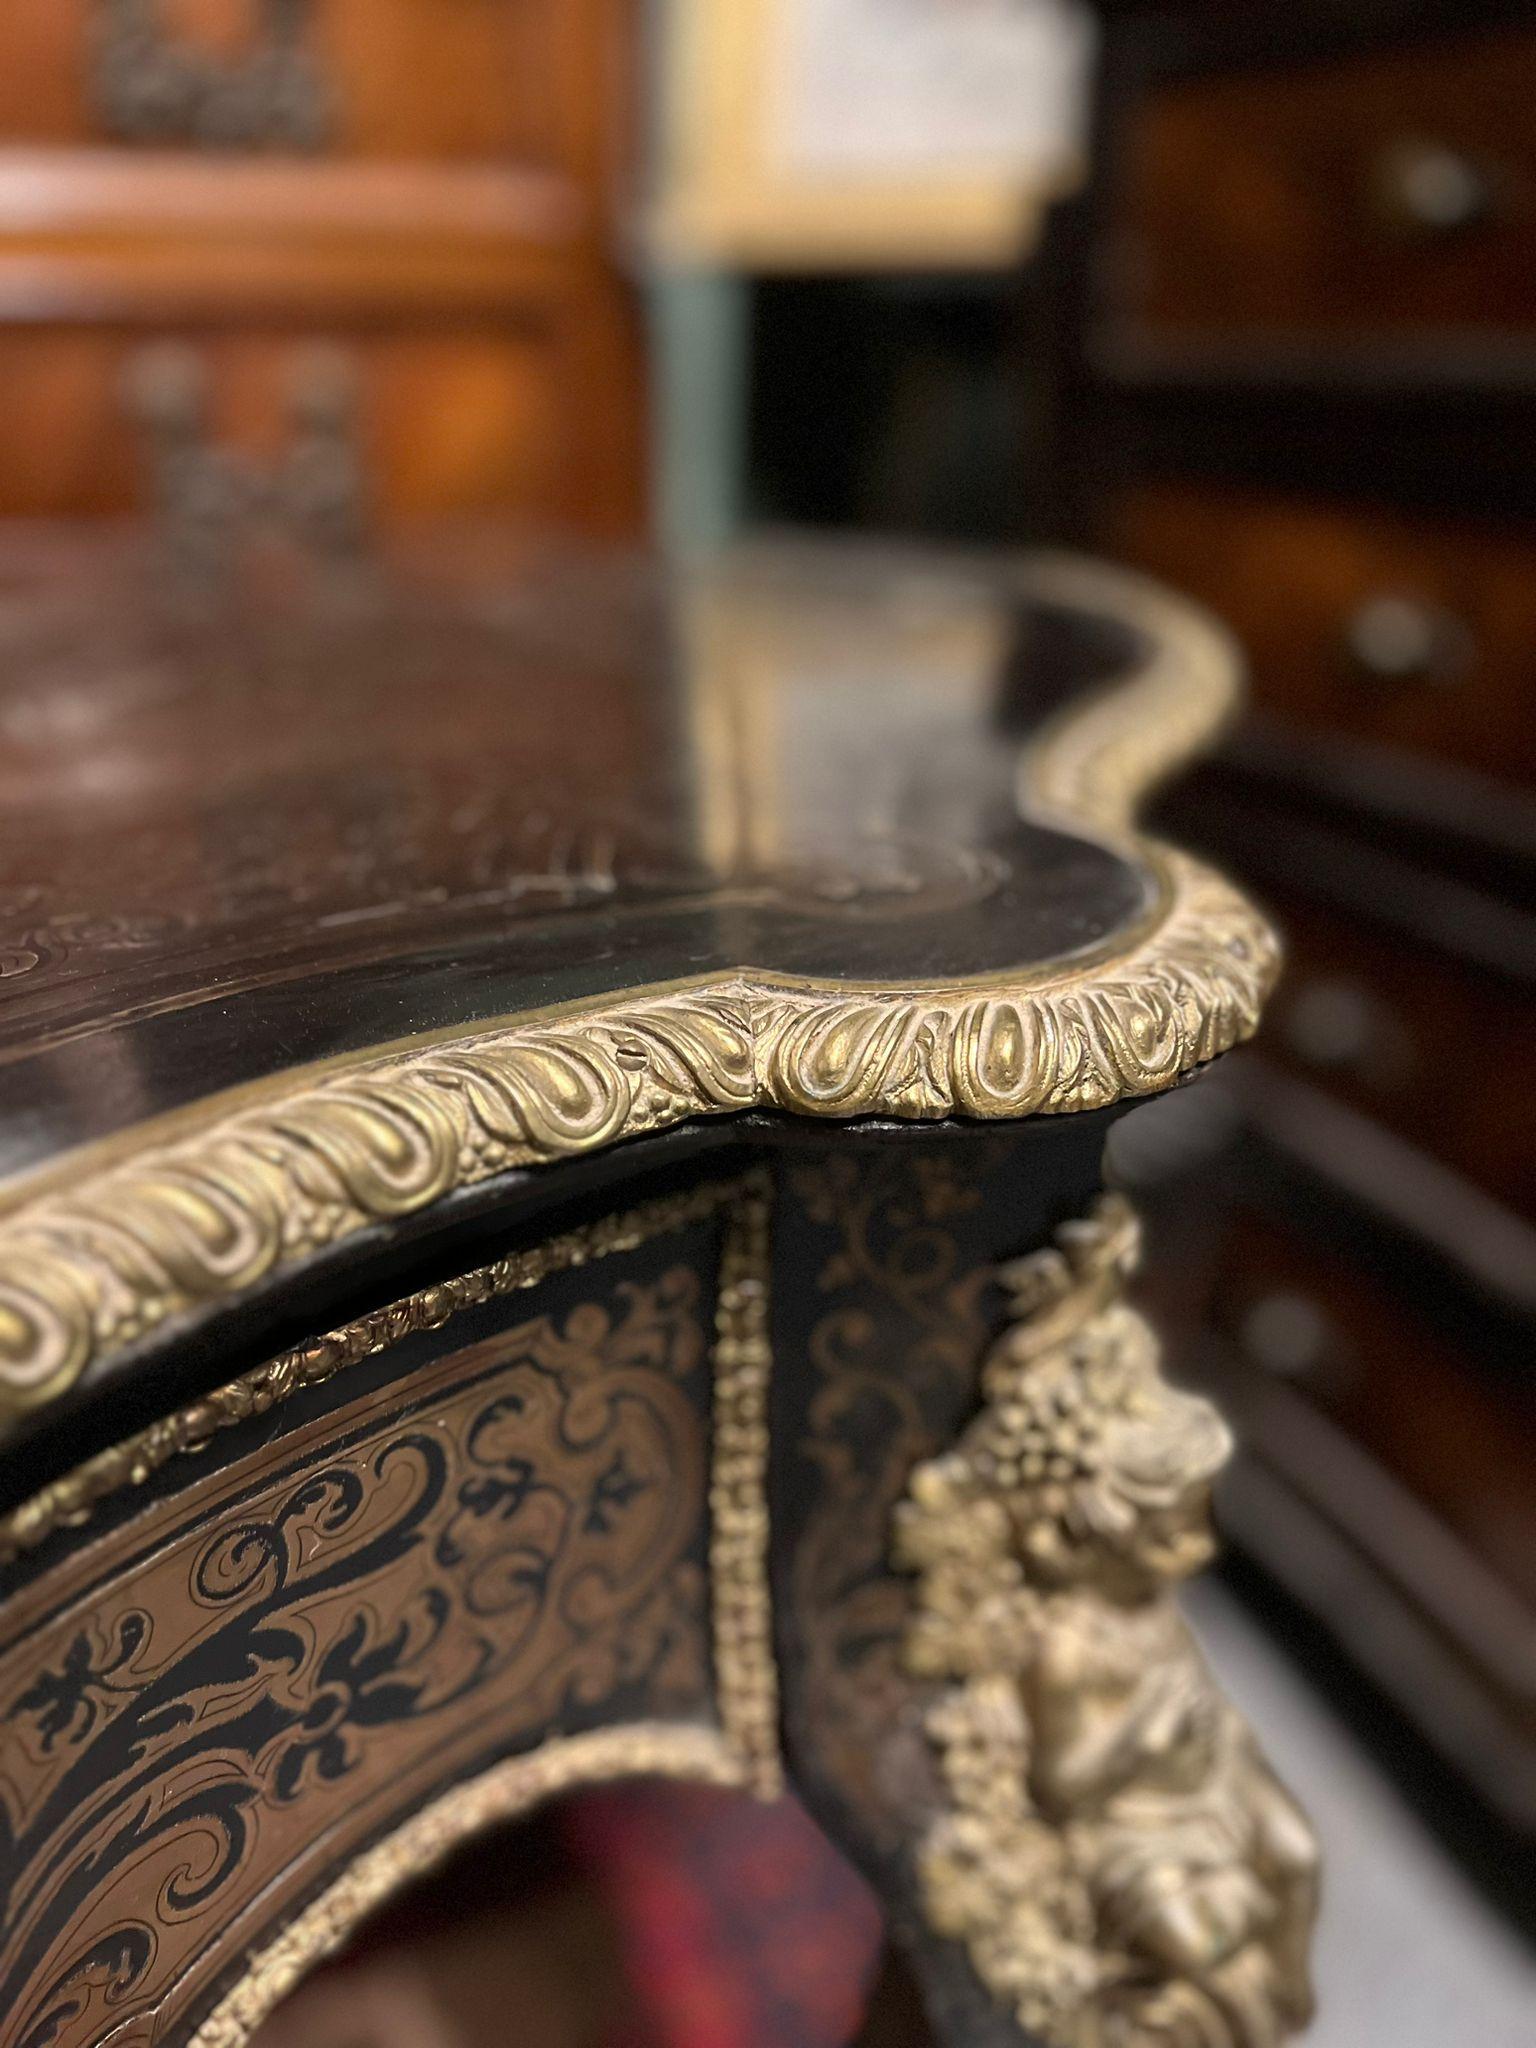 Rare table with moved top and legs, Boulle style with central drawer, 19th century.

The Boulle style is named after the famous French cabinetmaker André-Charles Boulle, who was active in the 17th century.

The table is fully inlaid in the Boulle